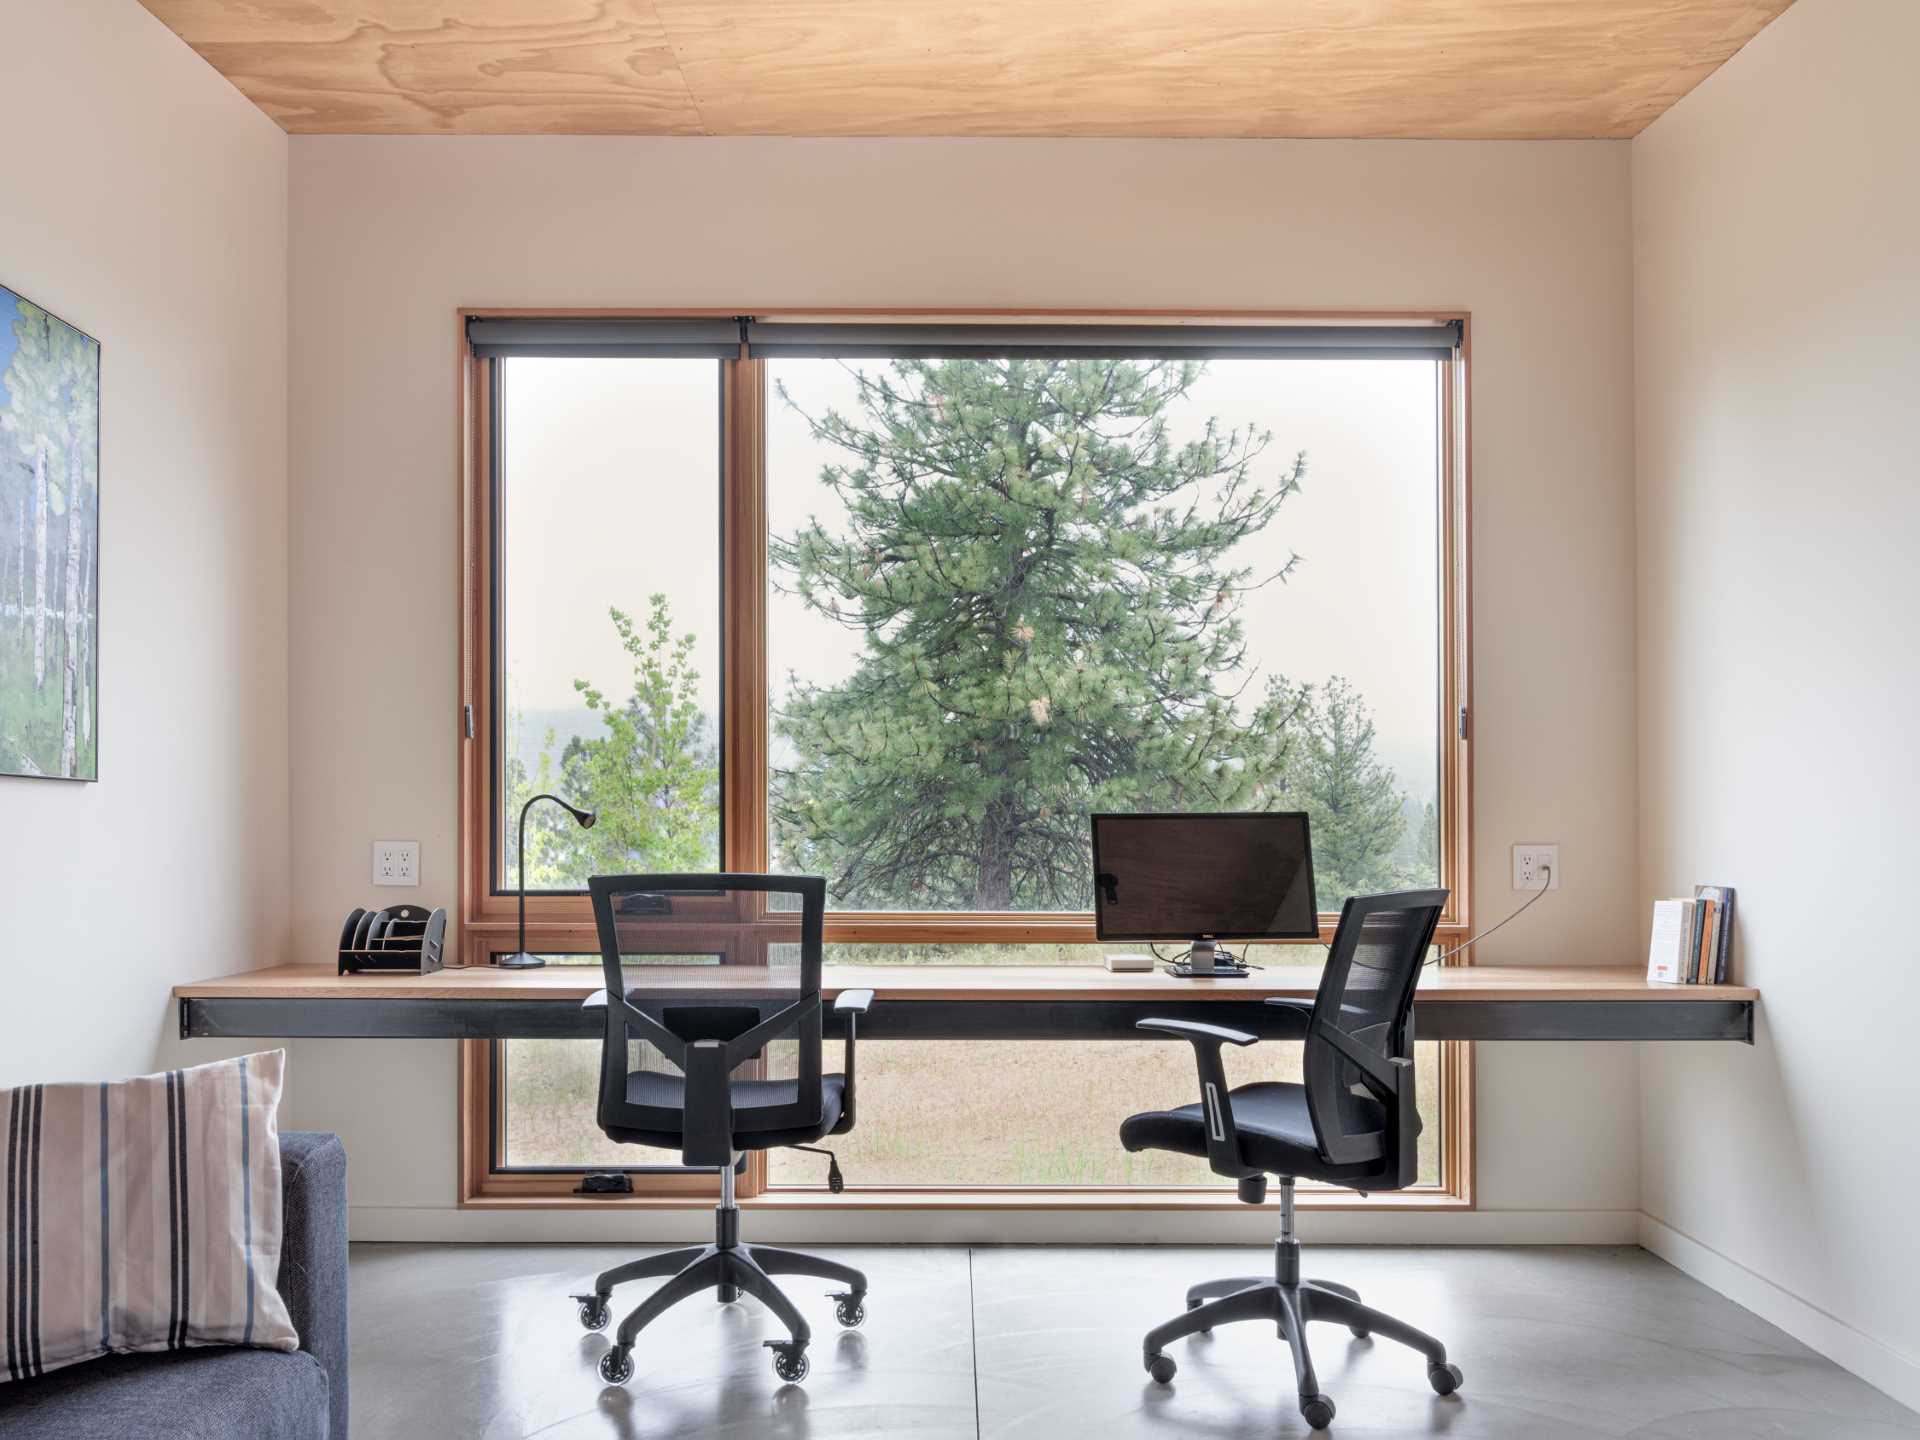 In a room that's dedicated to being a home office for two, a floating wood desk with a steel frame is positioned to take advantage of the views.